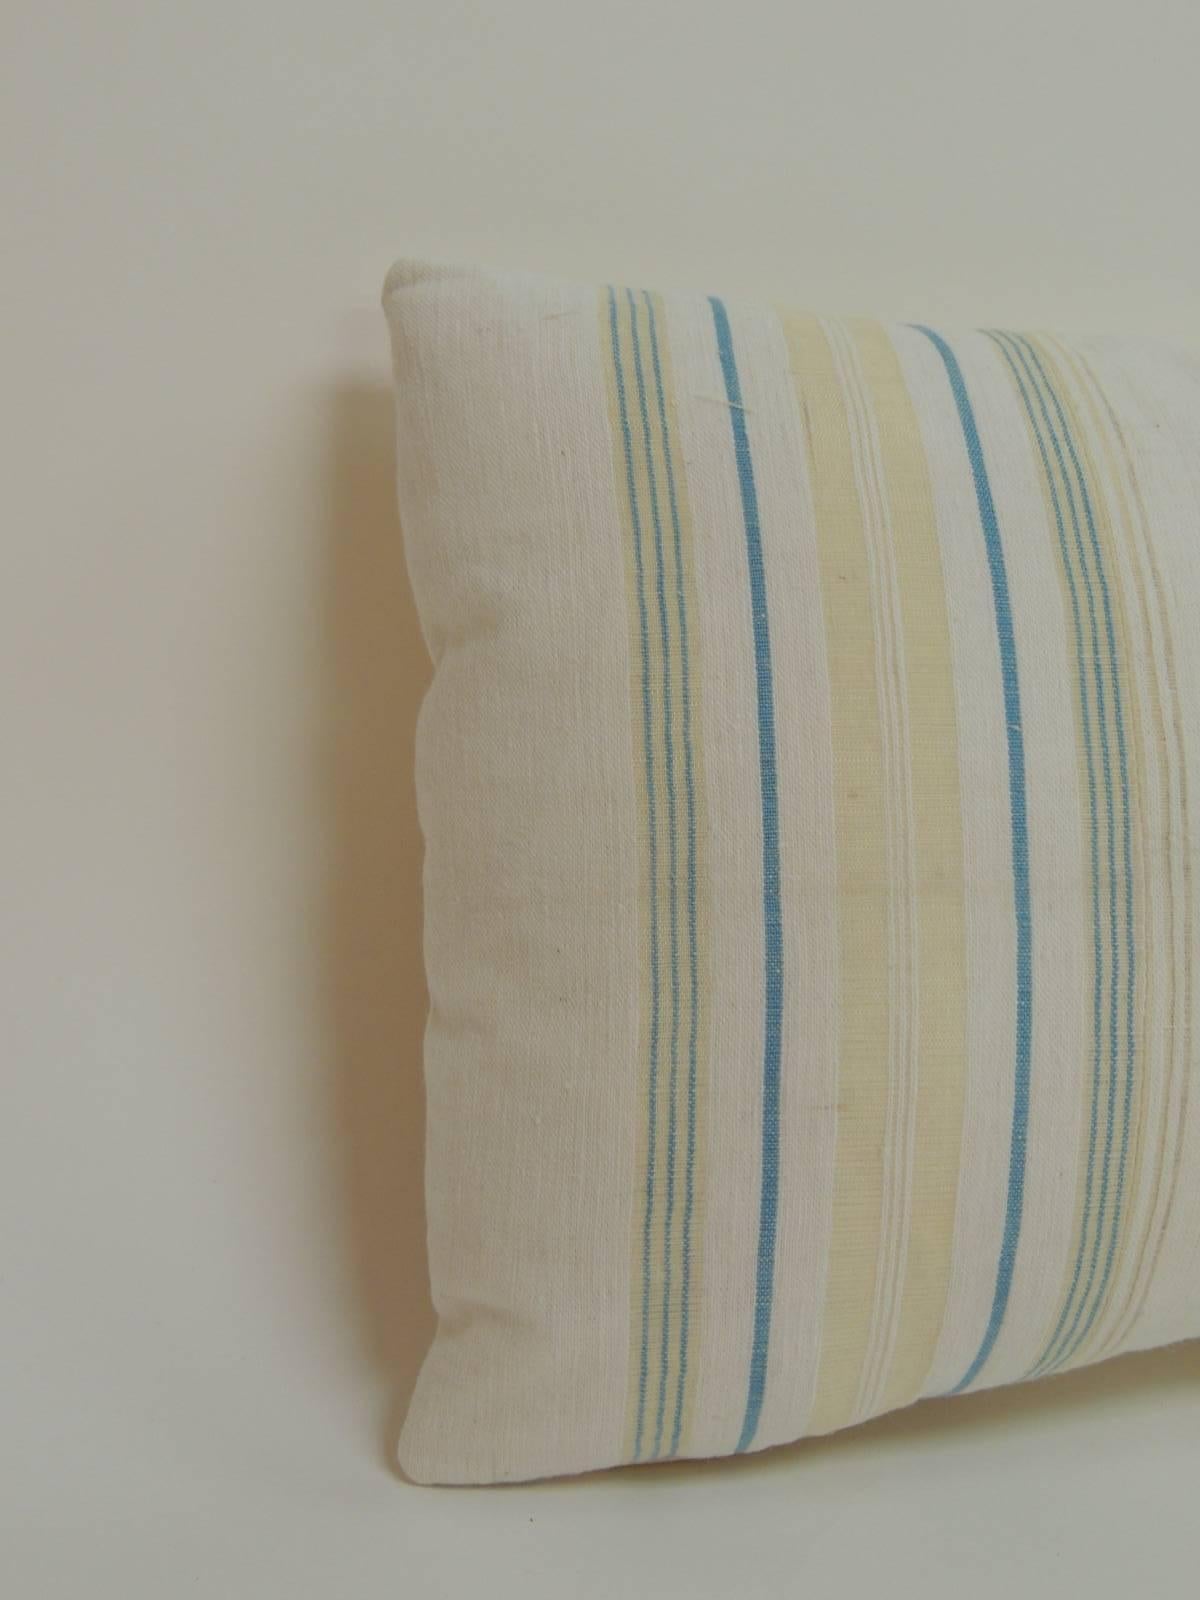 Vintage Turkish petite decorative pillow with sheer linen woven stripe. In shades of yellow, mustard, green, aqua blue and natural with natural linen backing. Front textile panel from Turkey 1980s has been reinforced to add strength to the petite